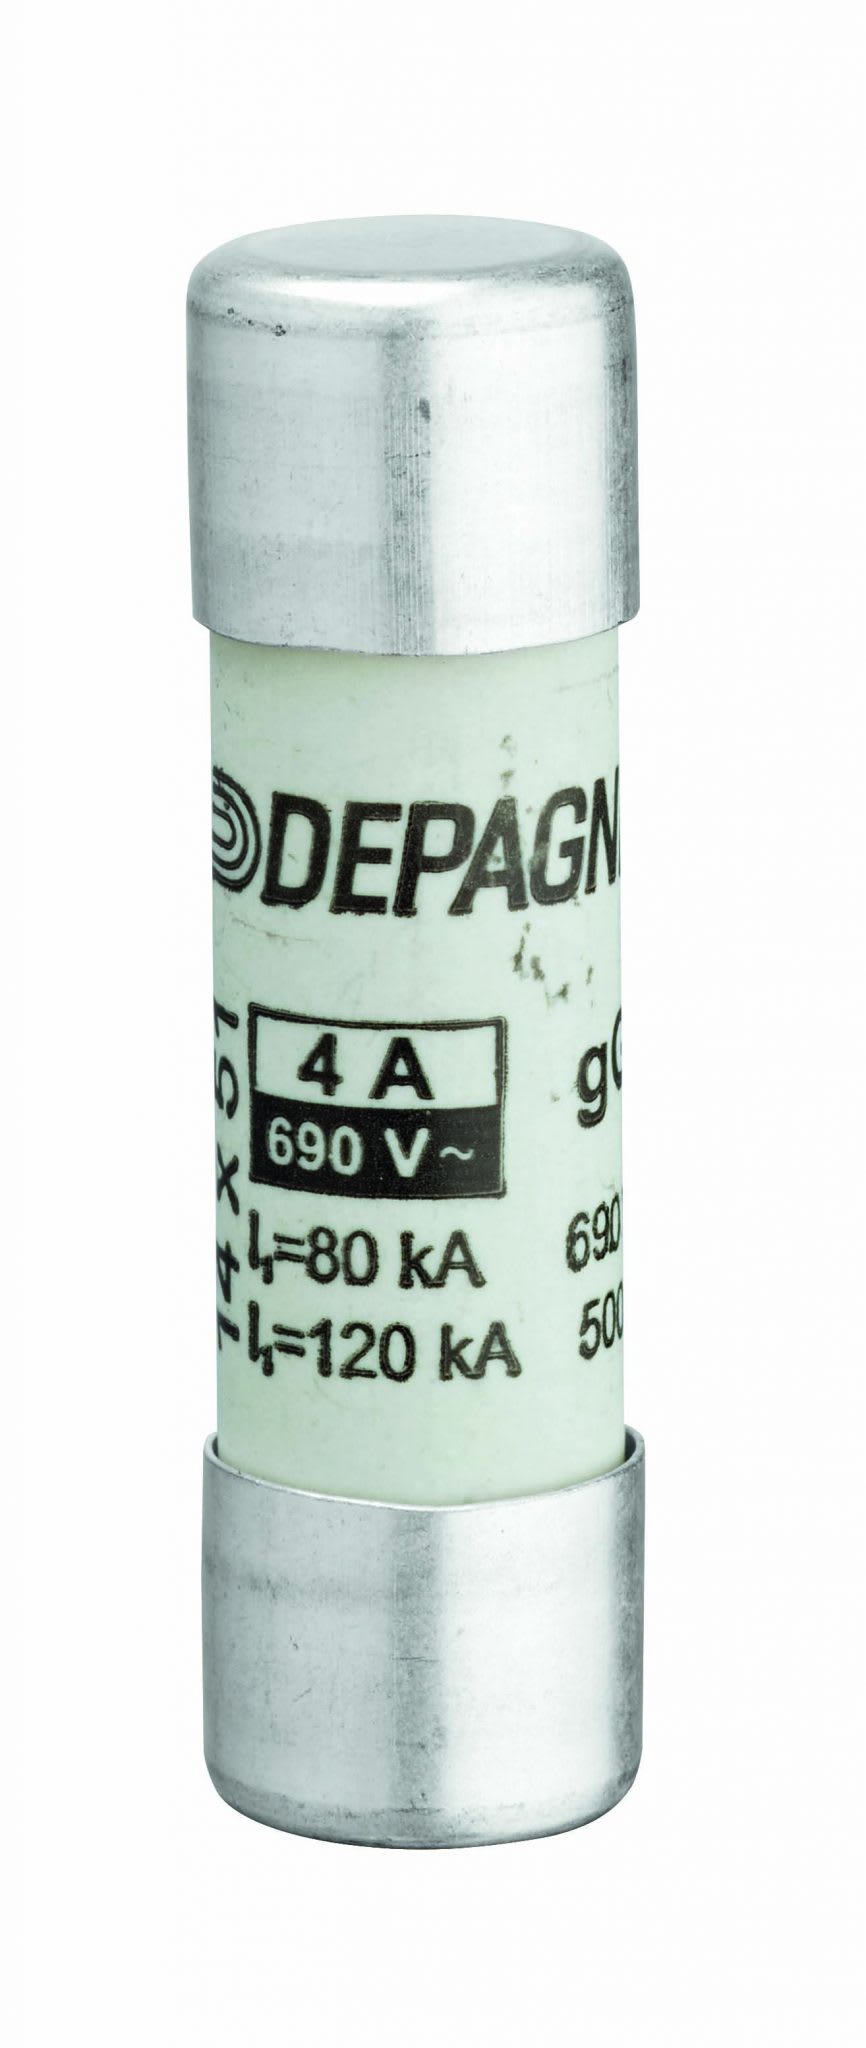 Depagne - Cartouche fusible cylindrique NF industrielle 10x38, gG - 4A